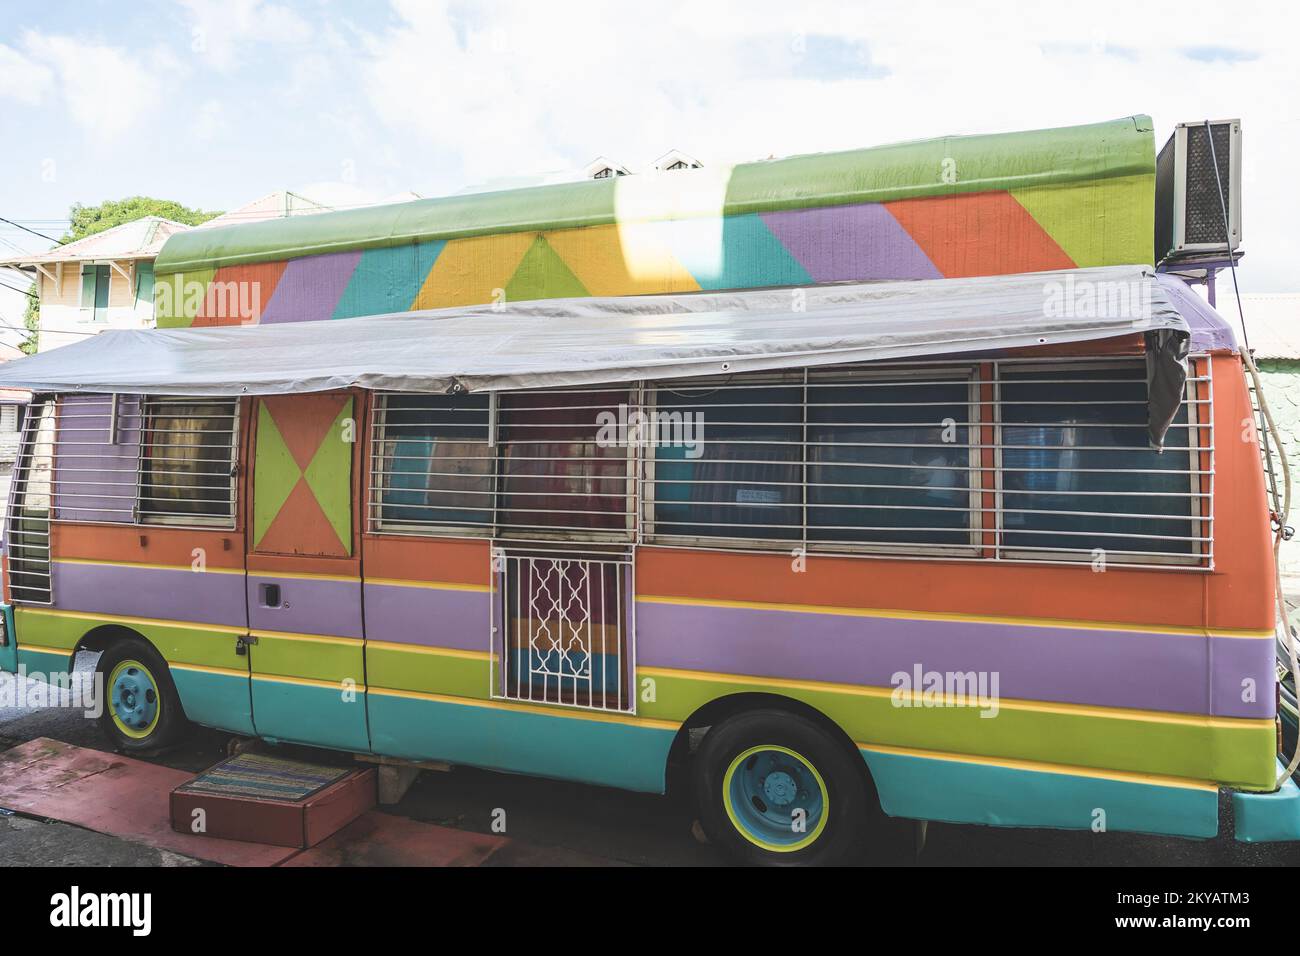 Closed colorful food truck on a street painted in stripes of colors with window bars Stock Photo